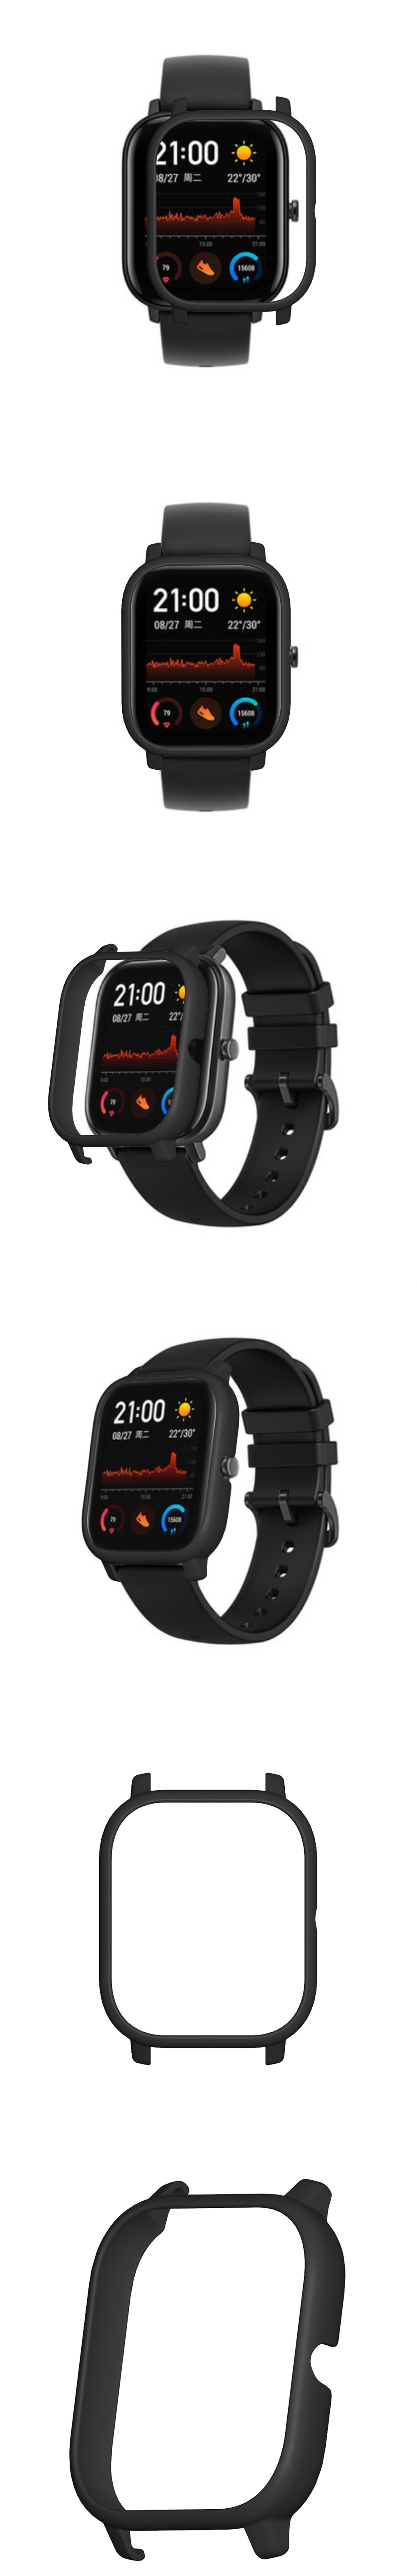 Color-PC-Watch-Case-Cover-Watch-Cover-Screen-Protector-for-Amazfit-GTS-1582191-6